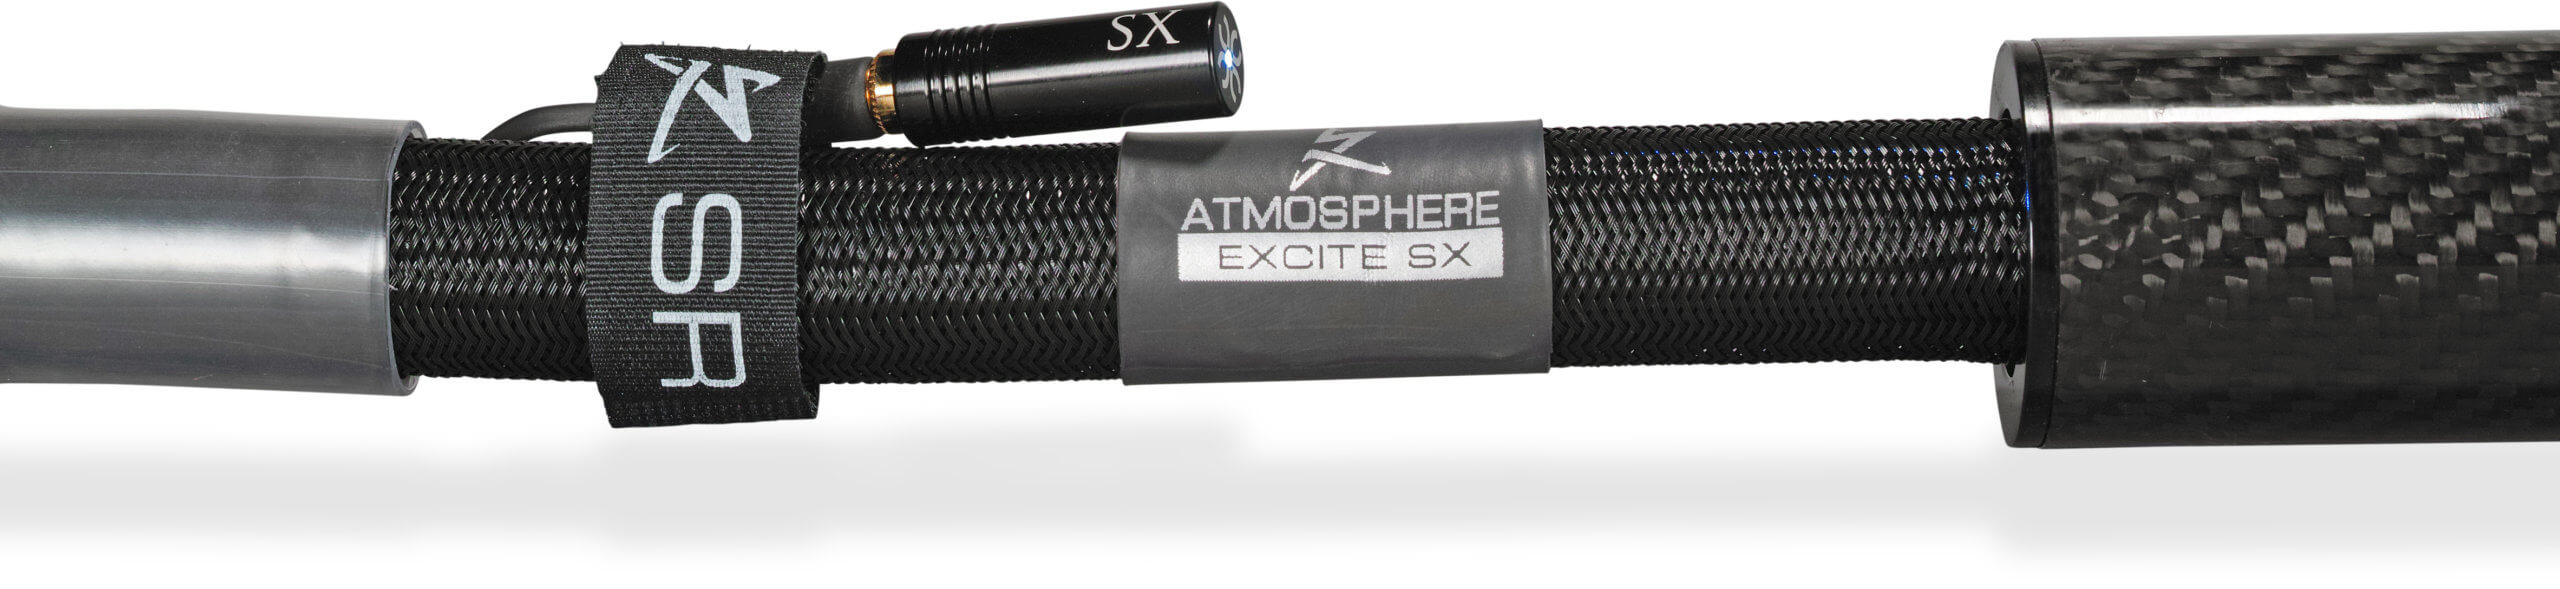 Synergistic Research Excite SX - Atmosphere SX Series AC Power Cables